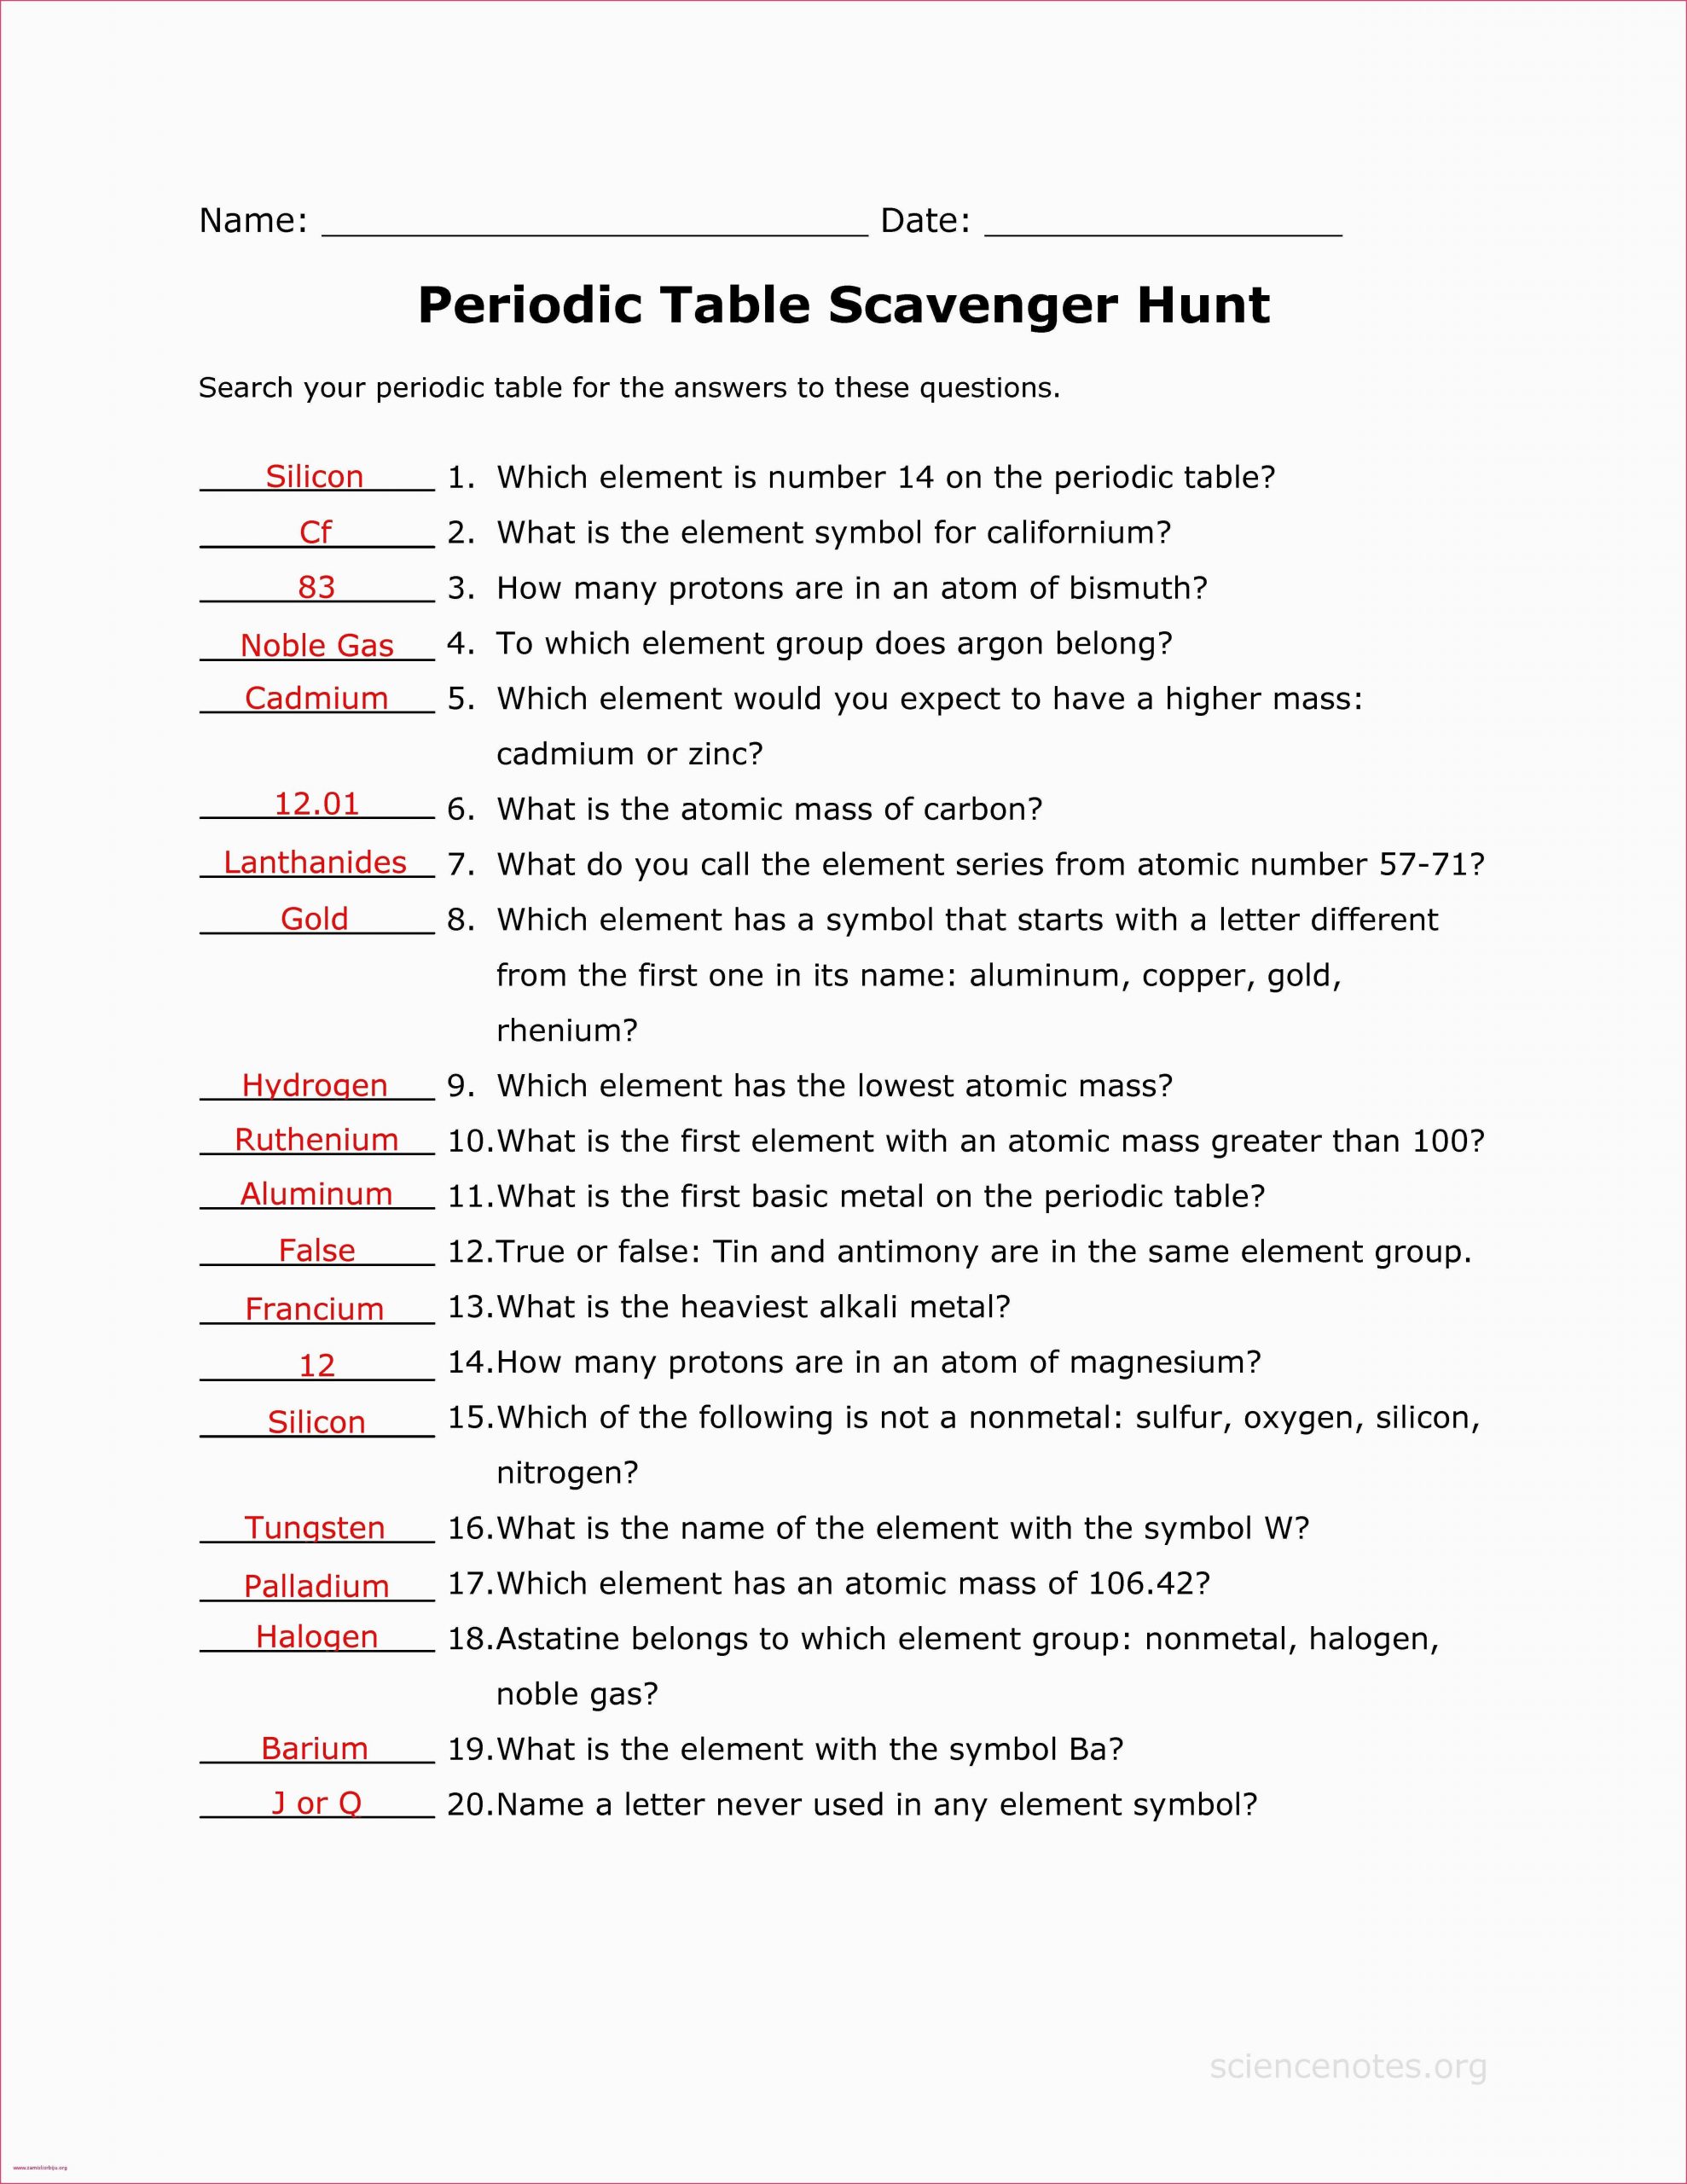 Hunting the Elements Video Worksheet You Can Download Best Periodic Table with Mass at Here